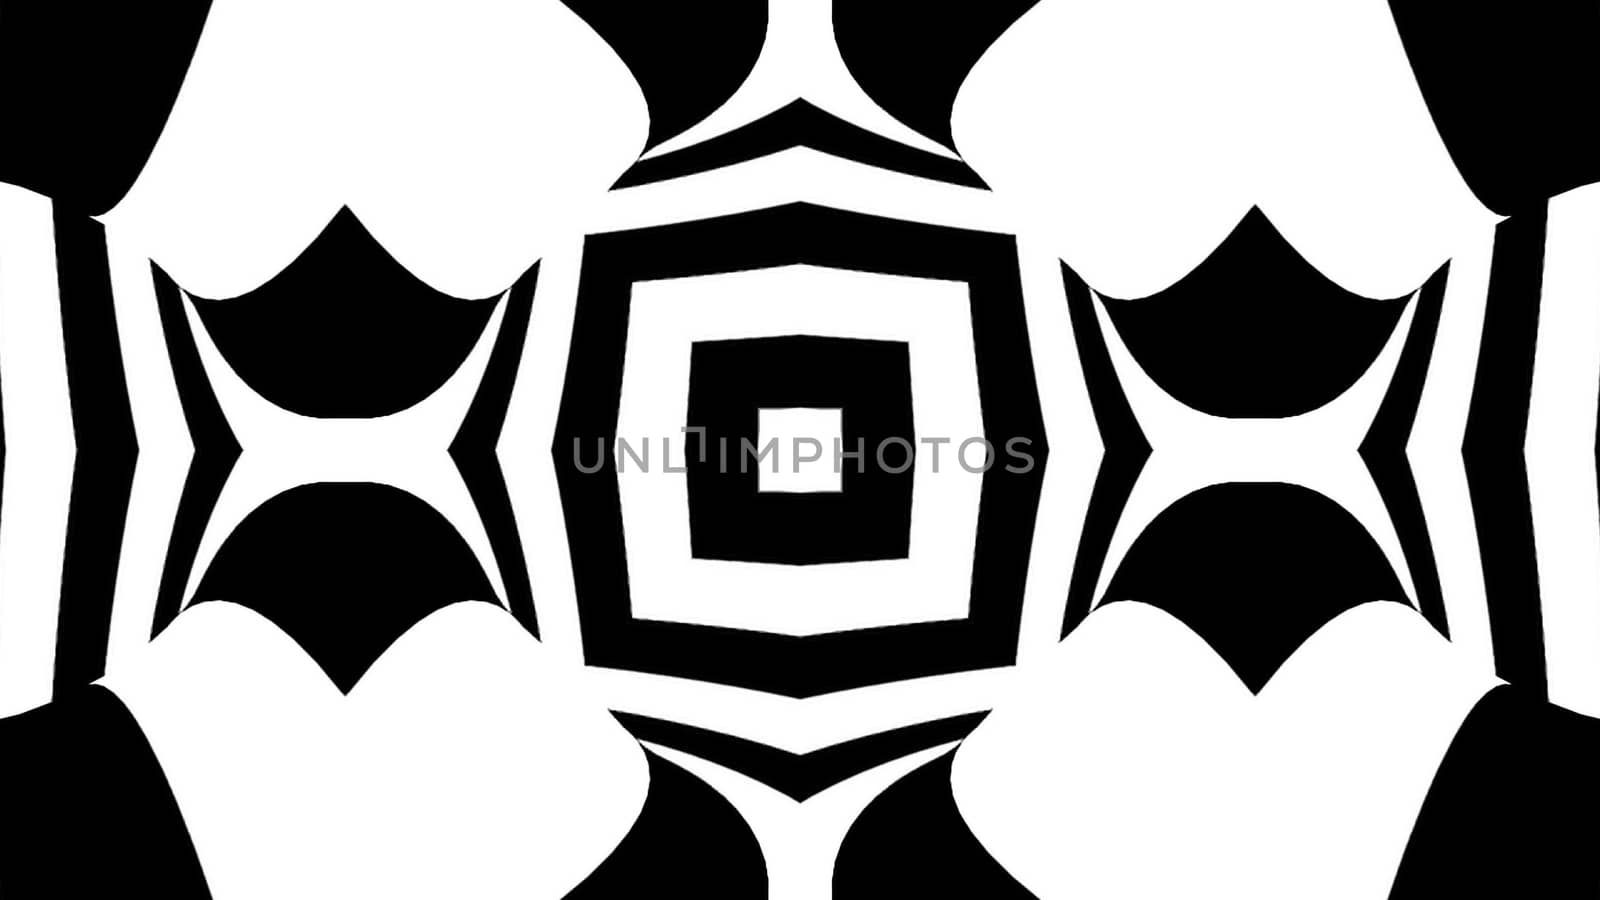 Abstract background with black and white elements. 3d rendering